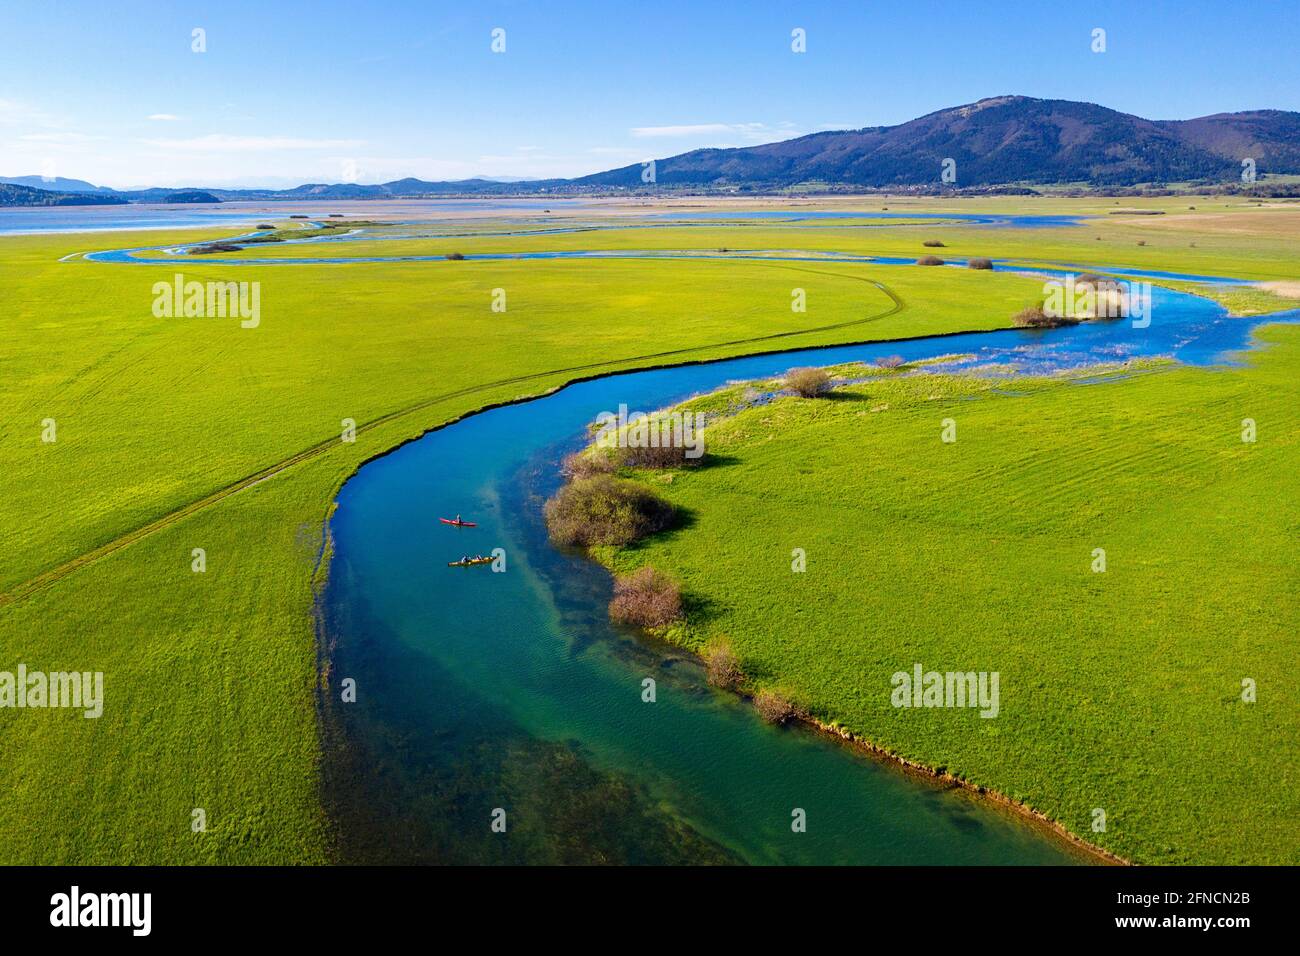 Top aerial view of two kayaks in tributary that flows into Cerknica Lake, beautiful view over the lake and mountains, taken by drone, Slovenia Stock Photo